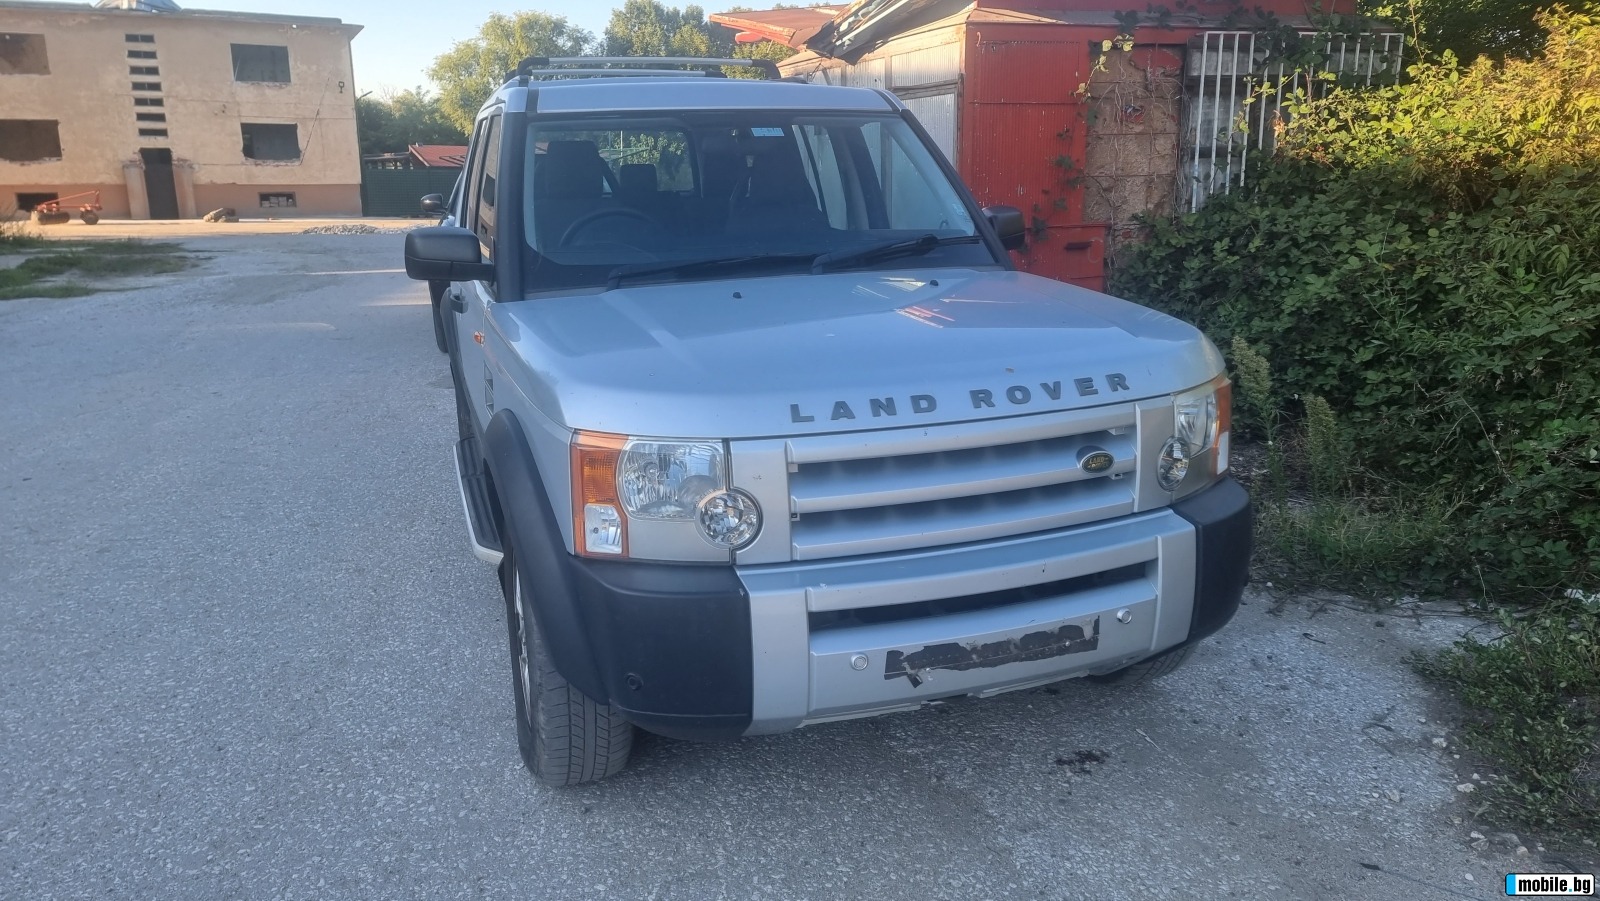 Land Rover Discovery 2,7    | Mobile.bg   2